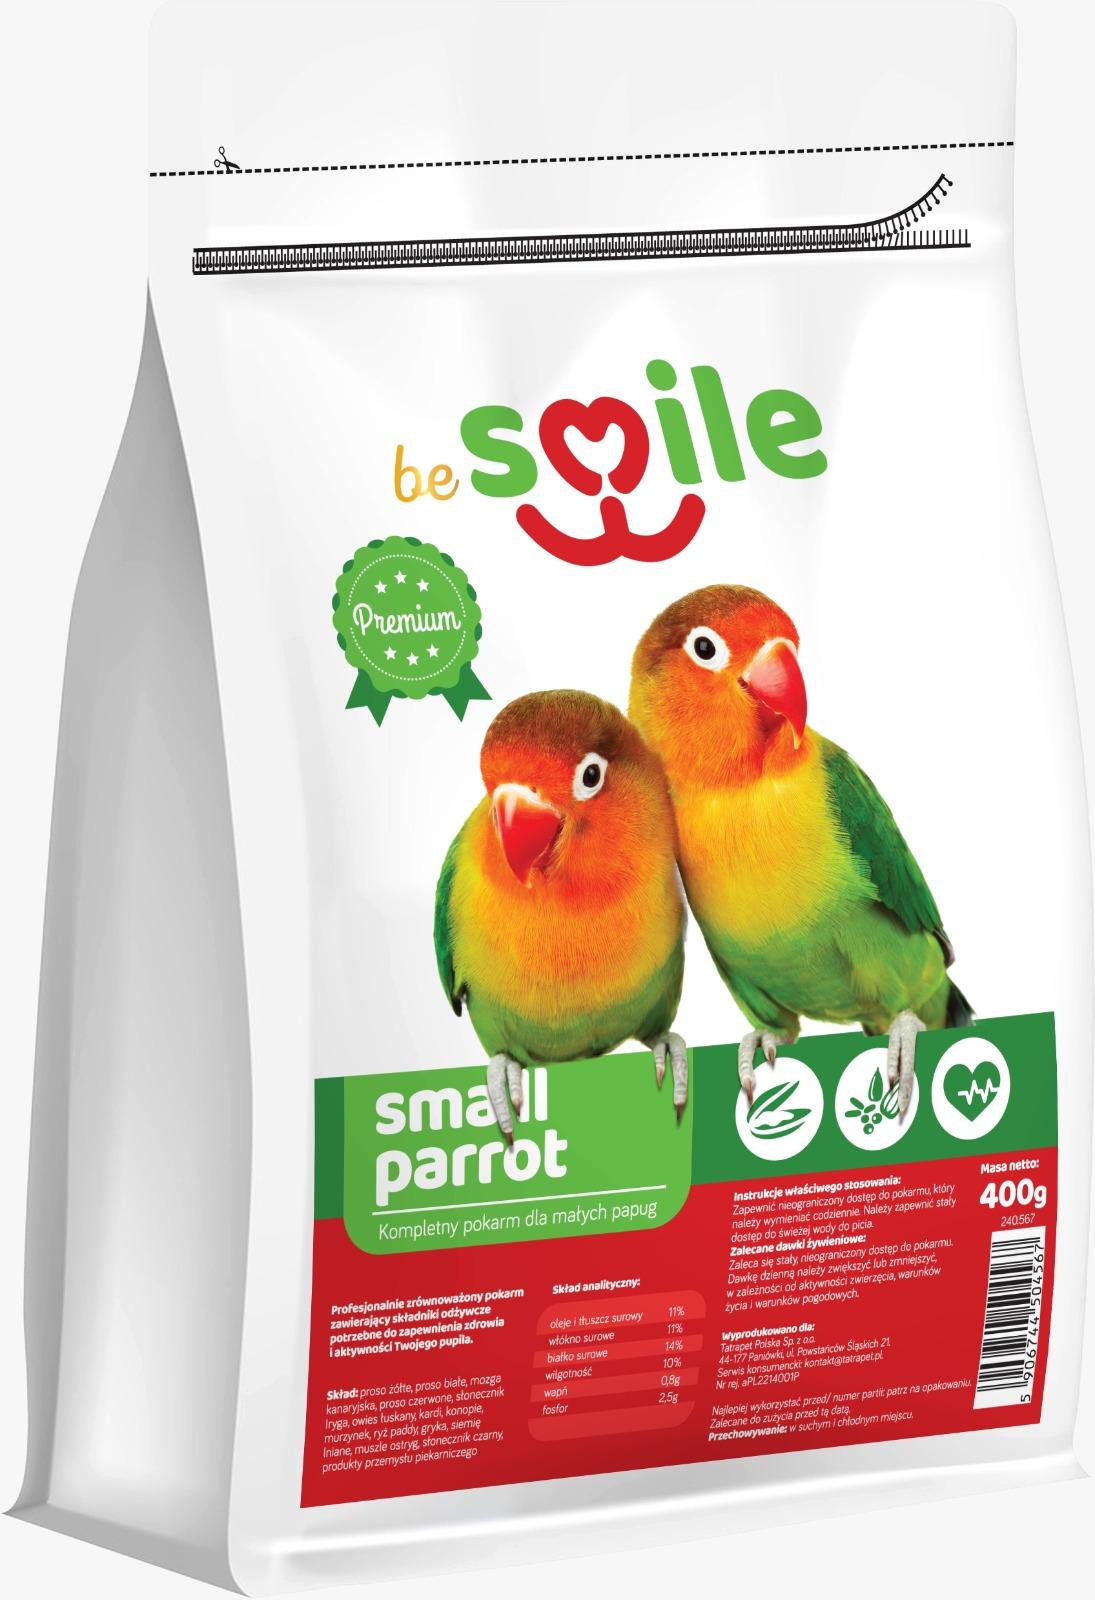 beSMILE PARROT - Small Parrot 800g food for small parrots